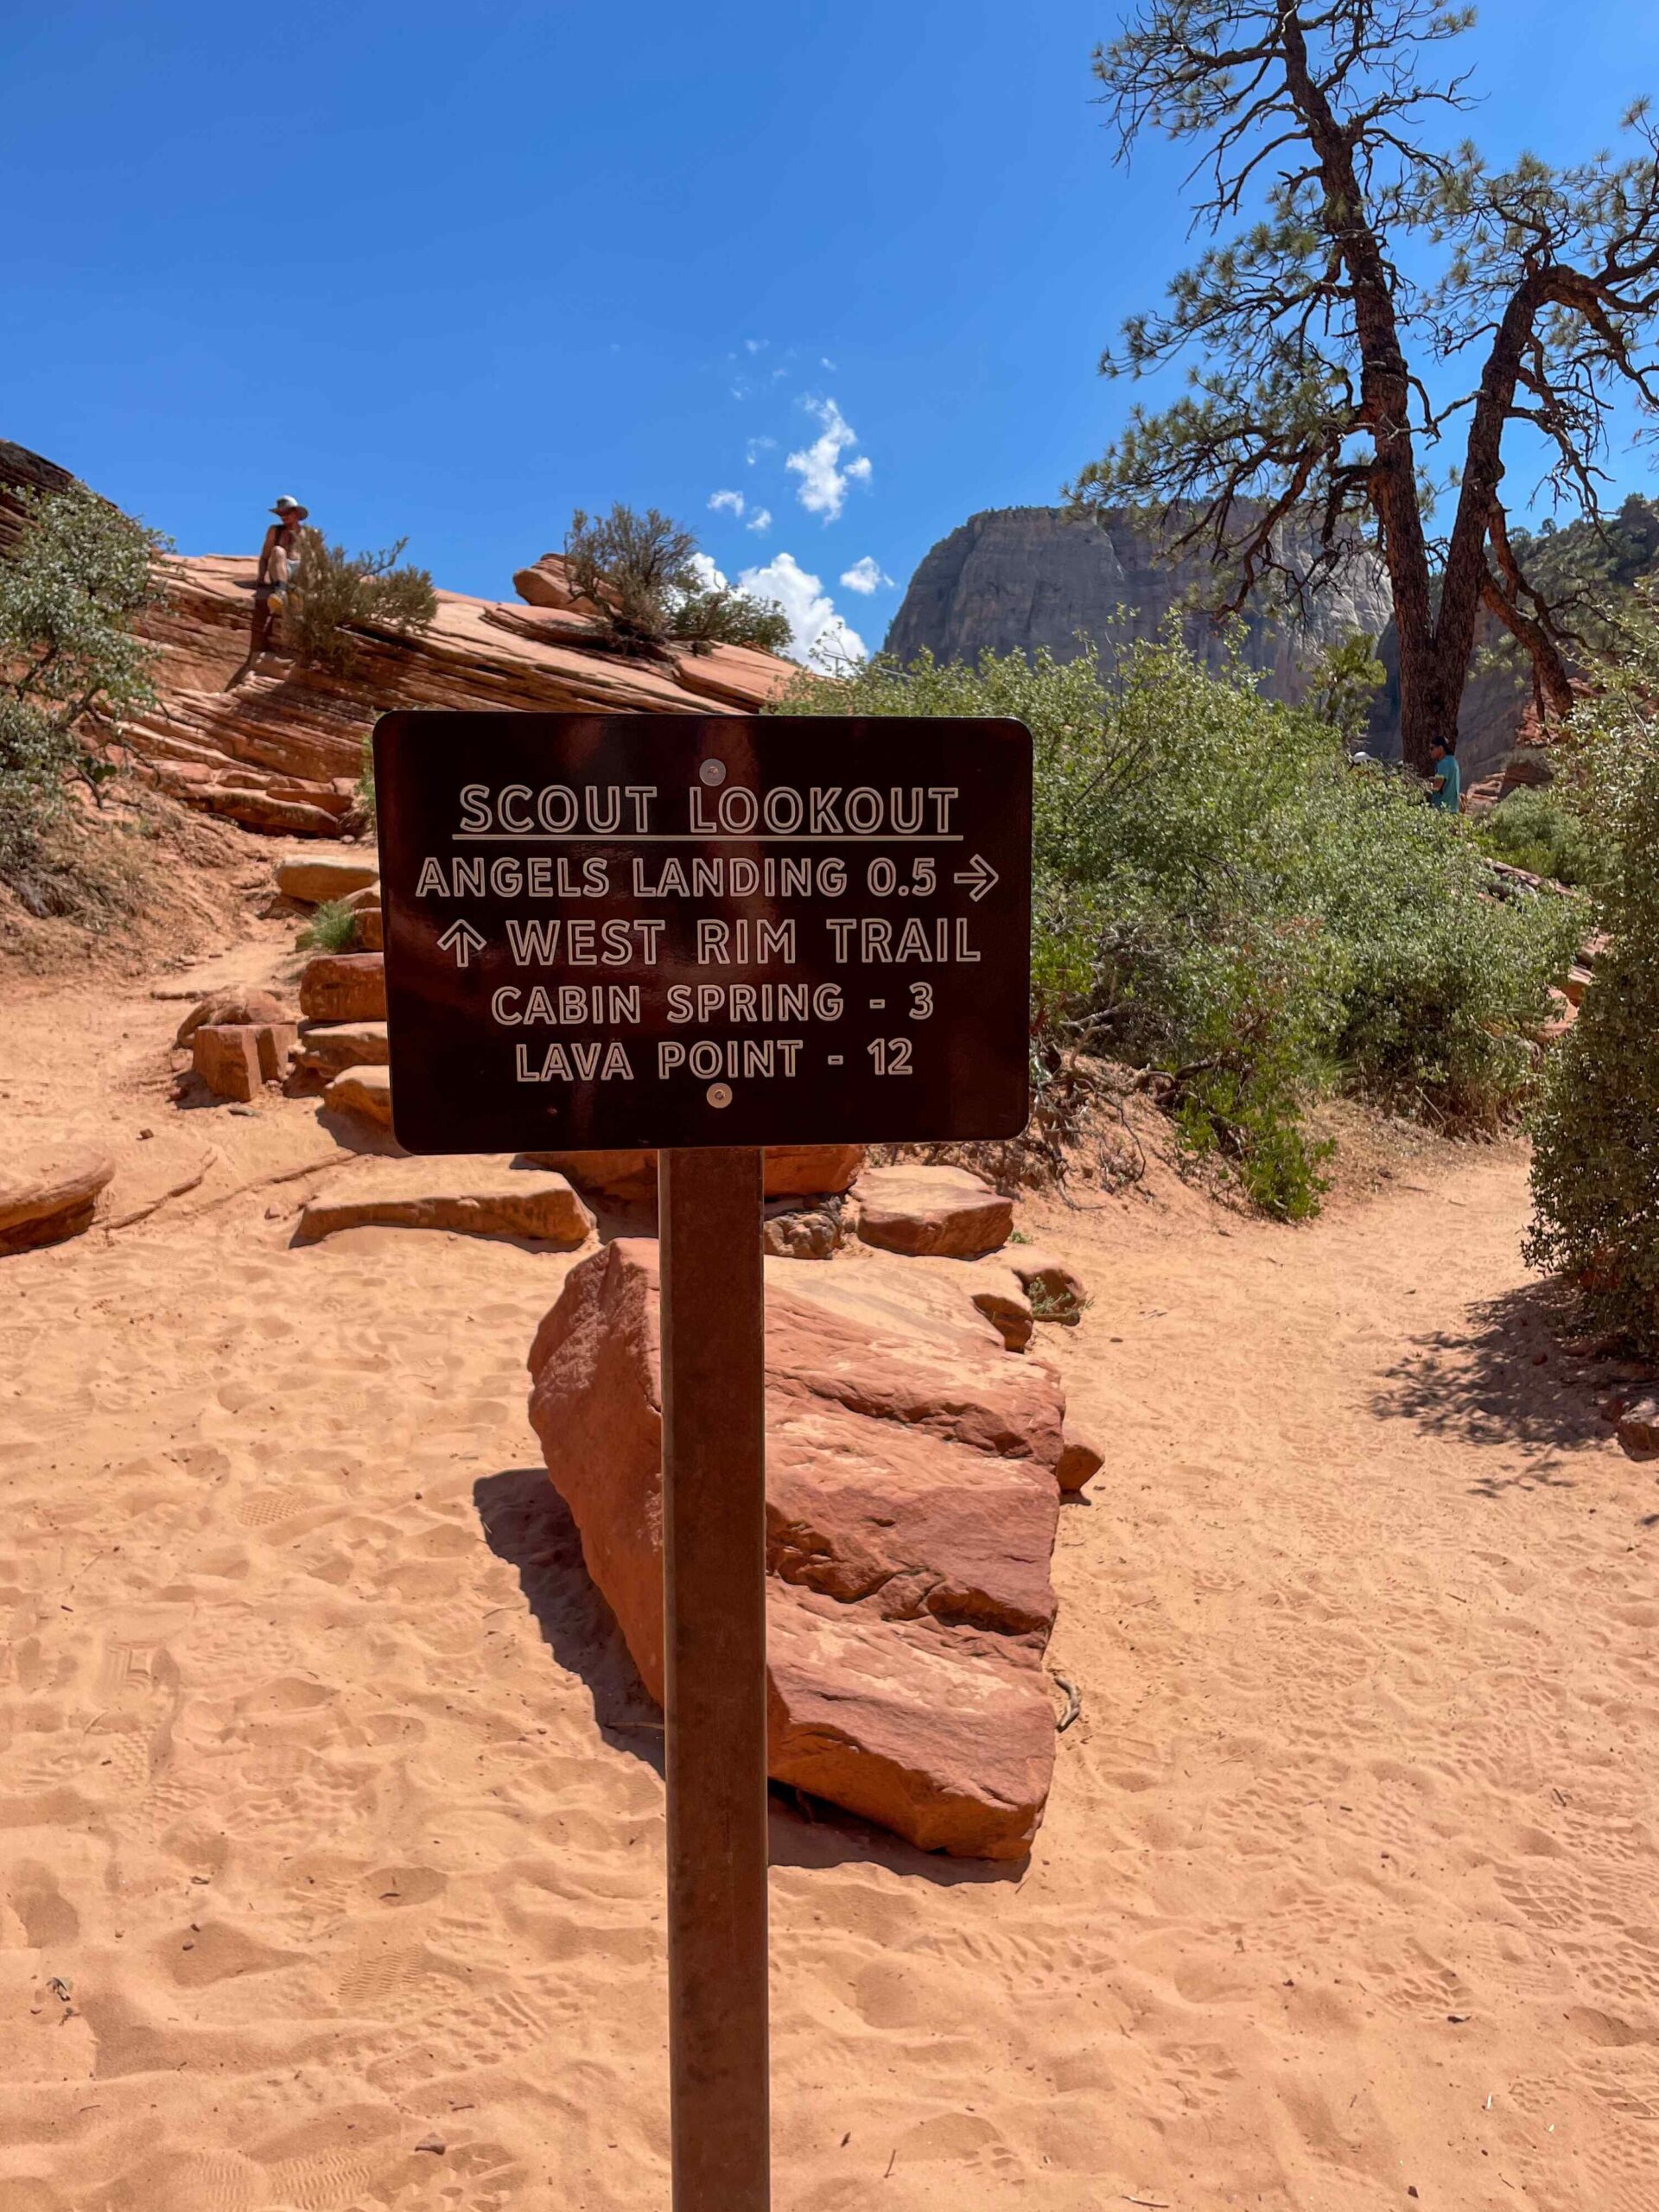 Scout Lookout sign visible while hiking Angels Landing and the West Rim Trail